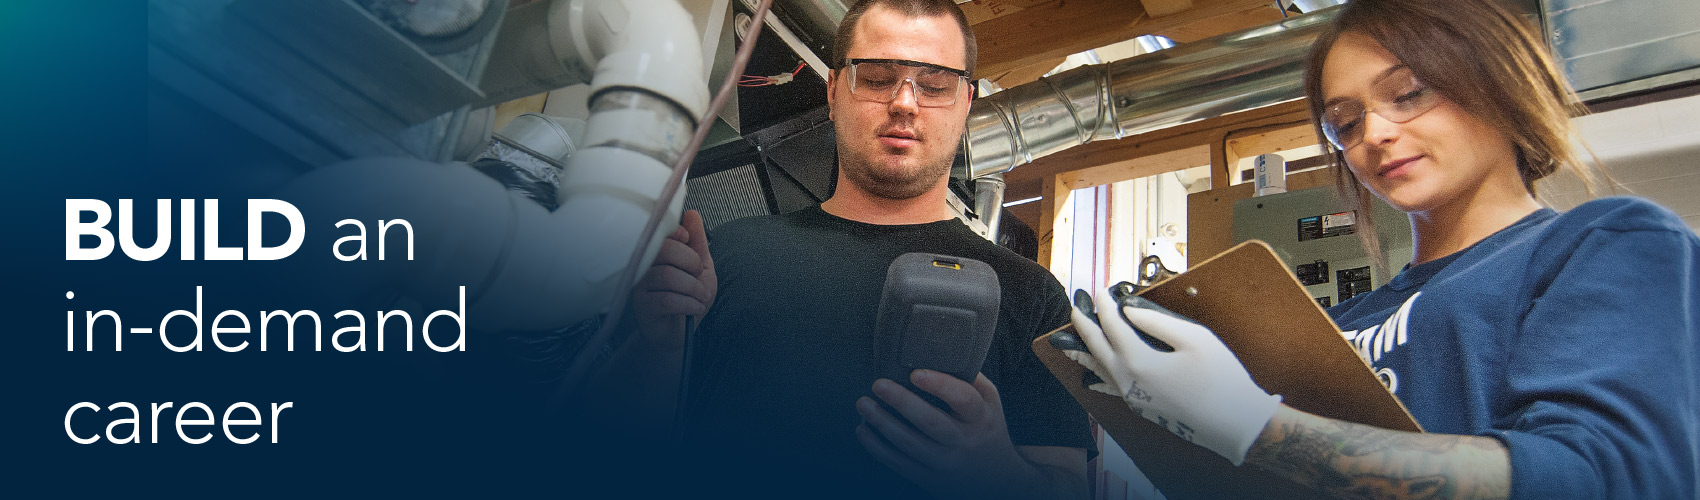 Skilled Trades at Georgian College: Build an in-demand career